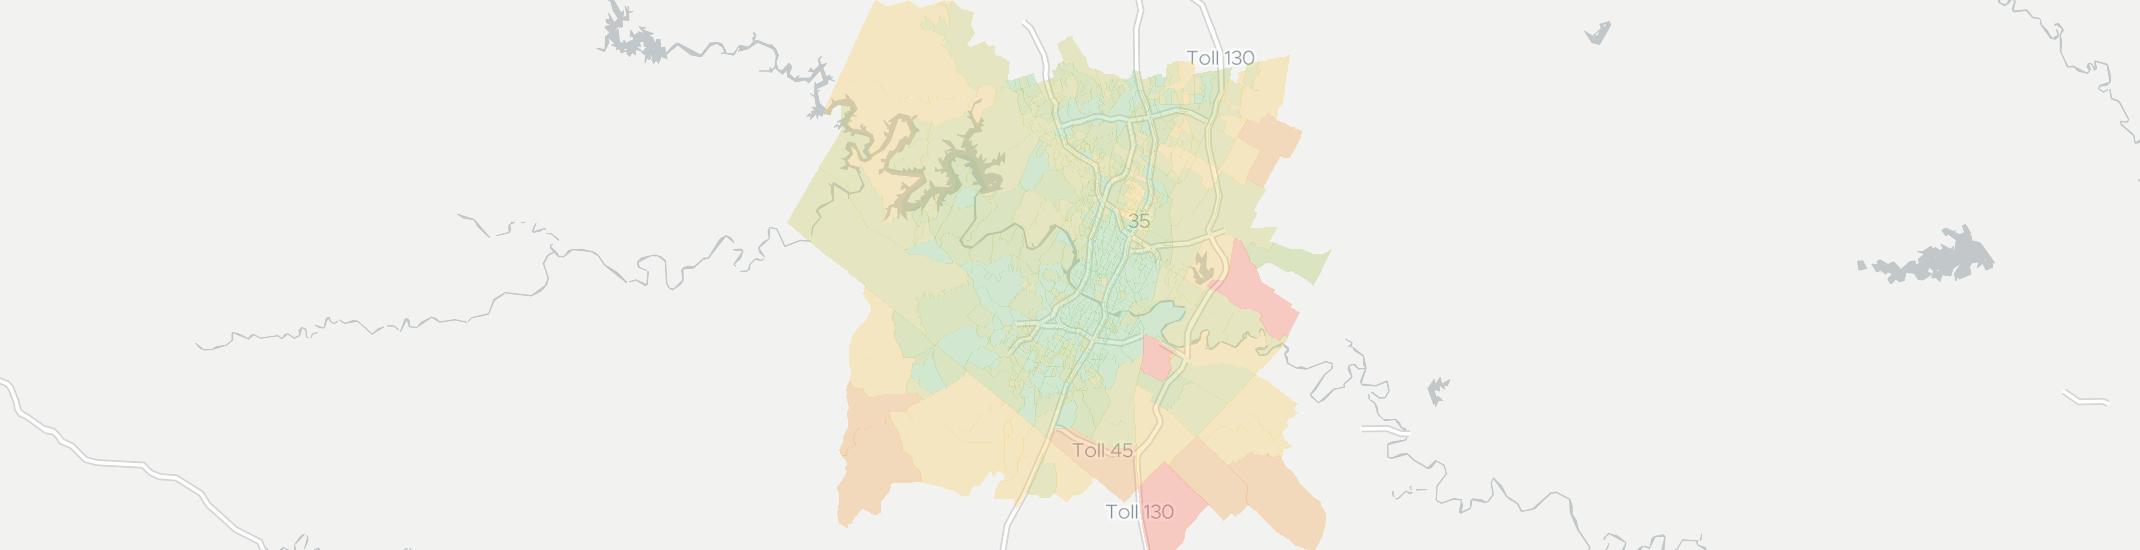 Austin Internet Competition Map. Click for interactive map.